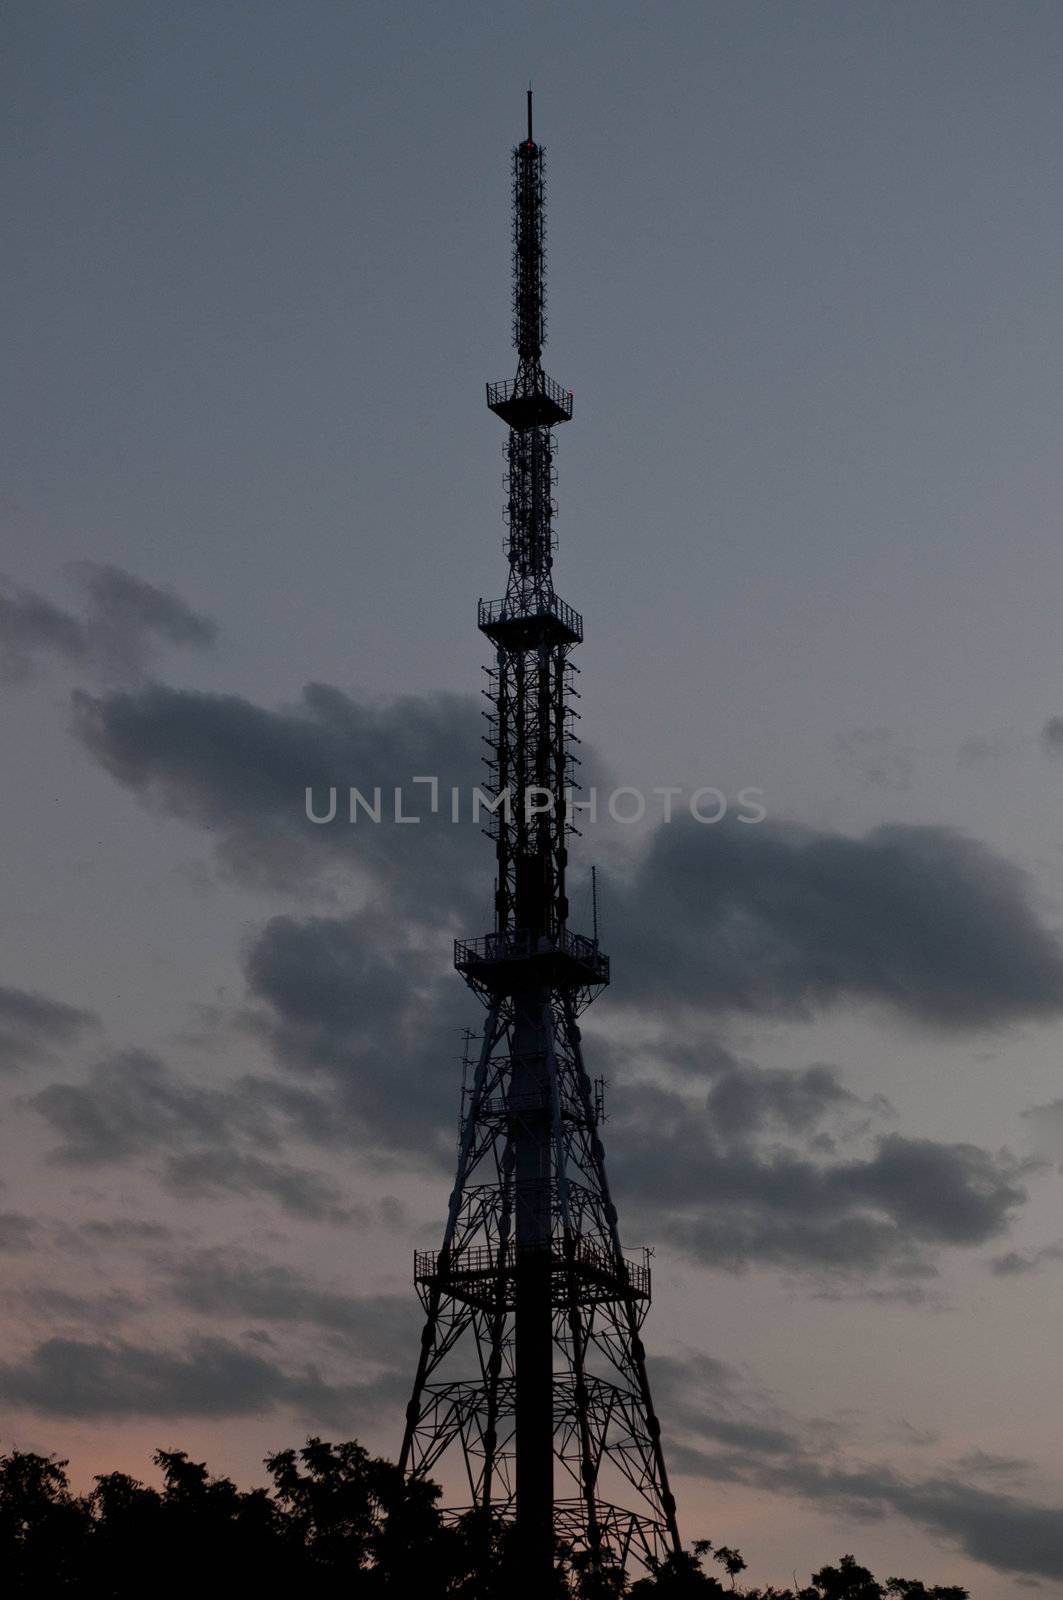 A telecommunication tower during dusk time